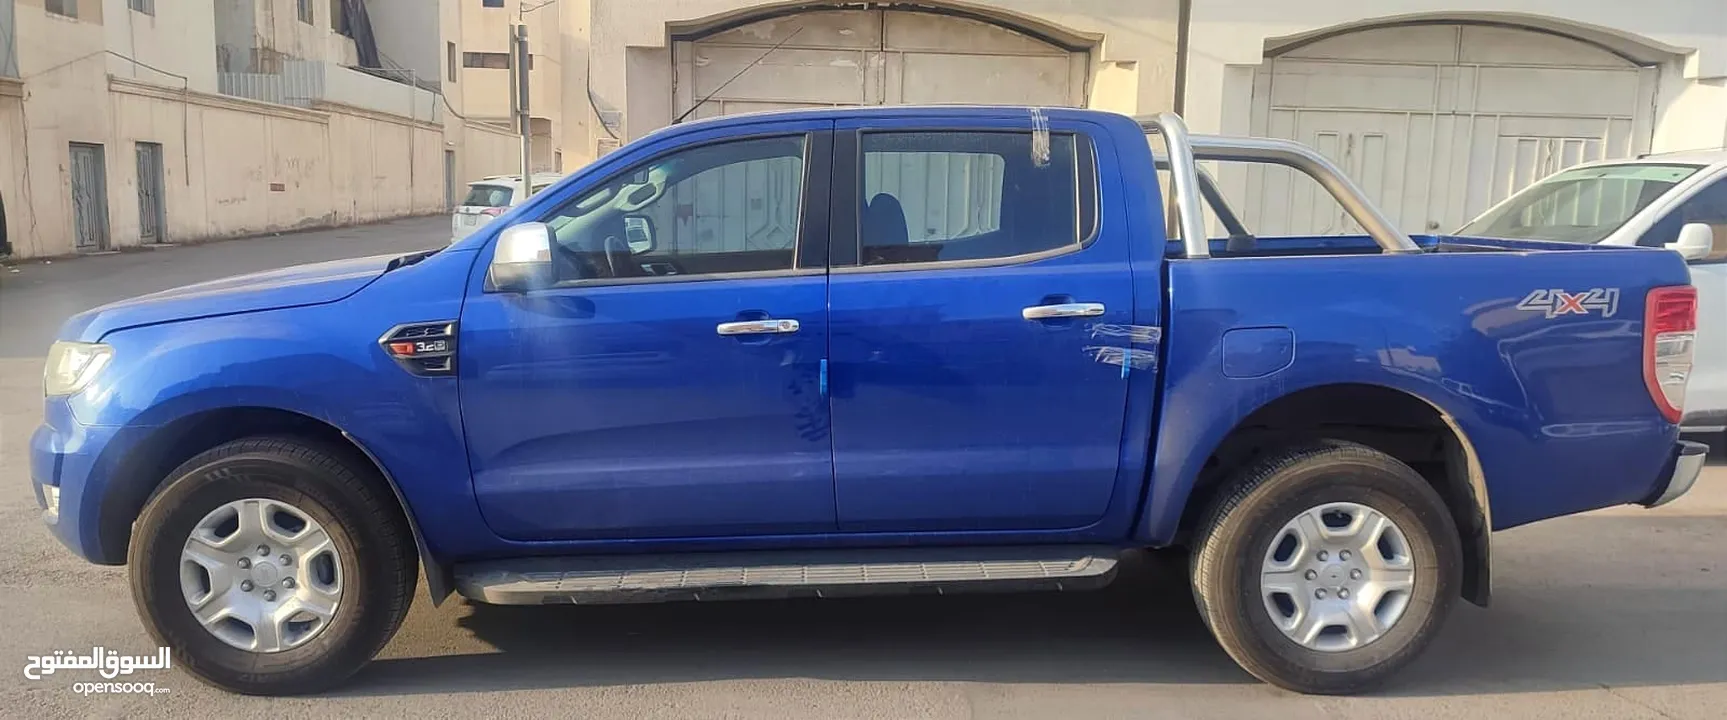 Ford Ranger Diesel Pick-up 2016 XLT Full Option 4x4 Vehicle Is In Excellent Condition